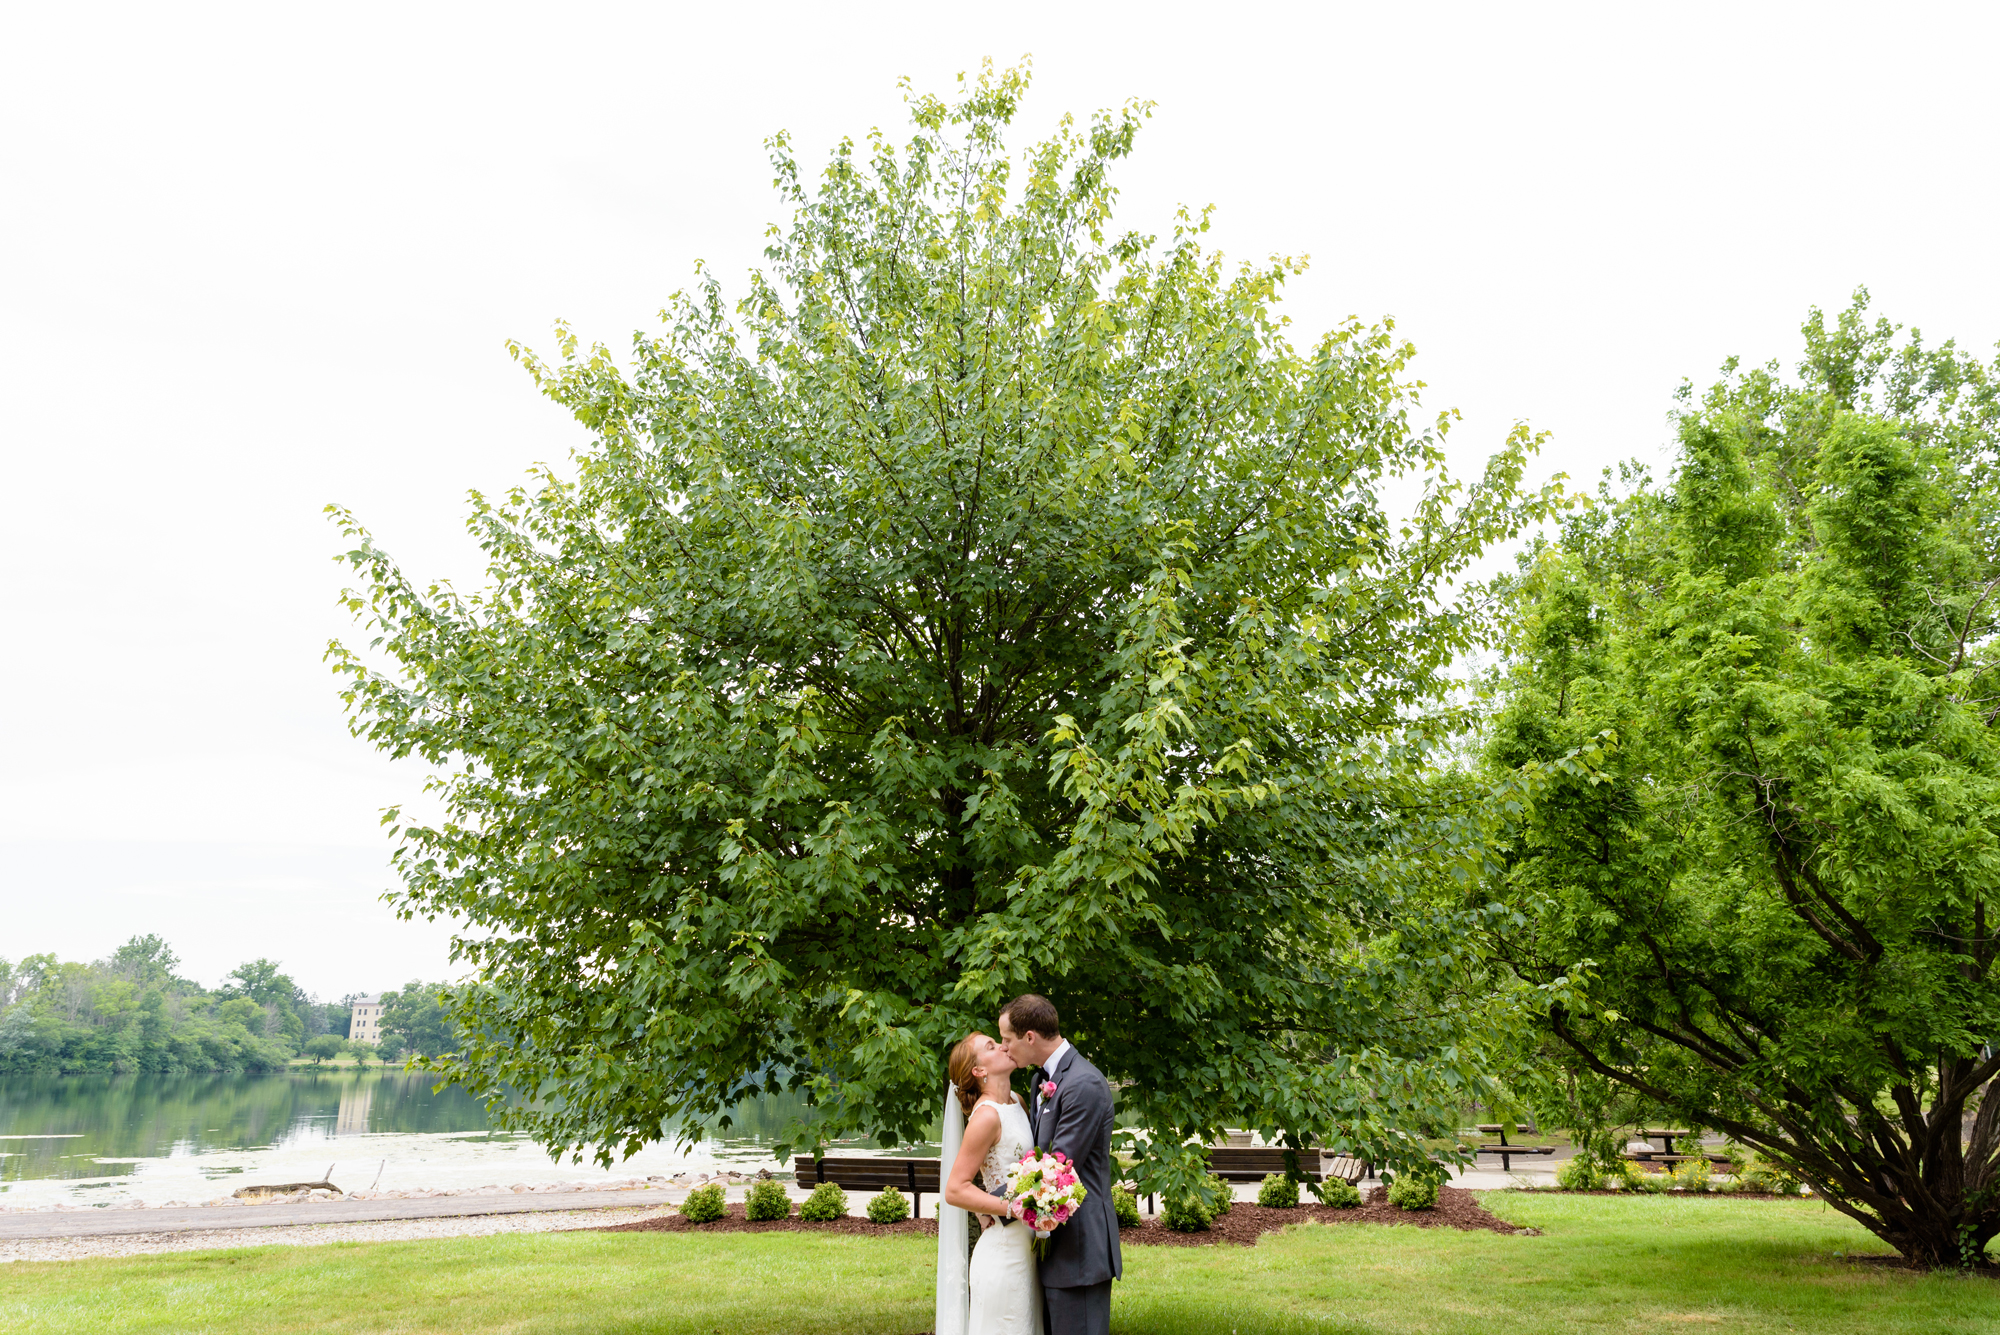 Bride & Groom in front of a tree by St Mary's Lake after their wedding ceremony at the Basilica of the Sacred Heart on the campus of the University of Notre Dame